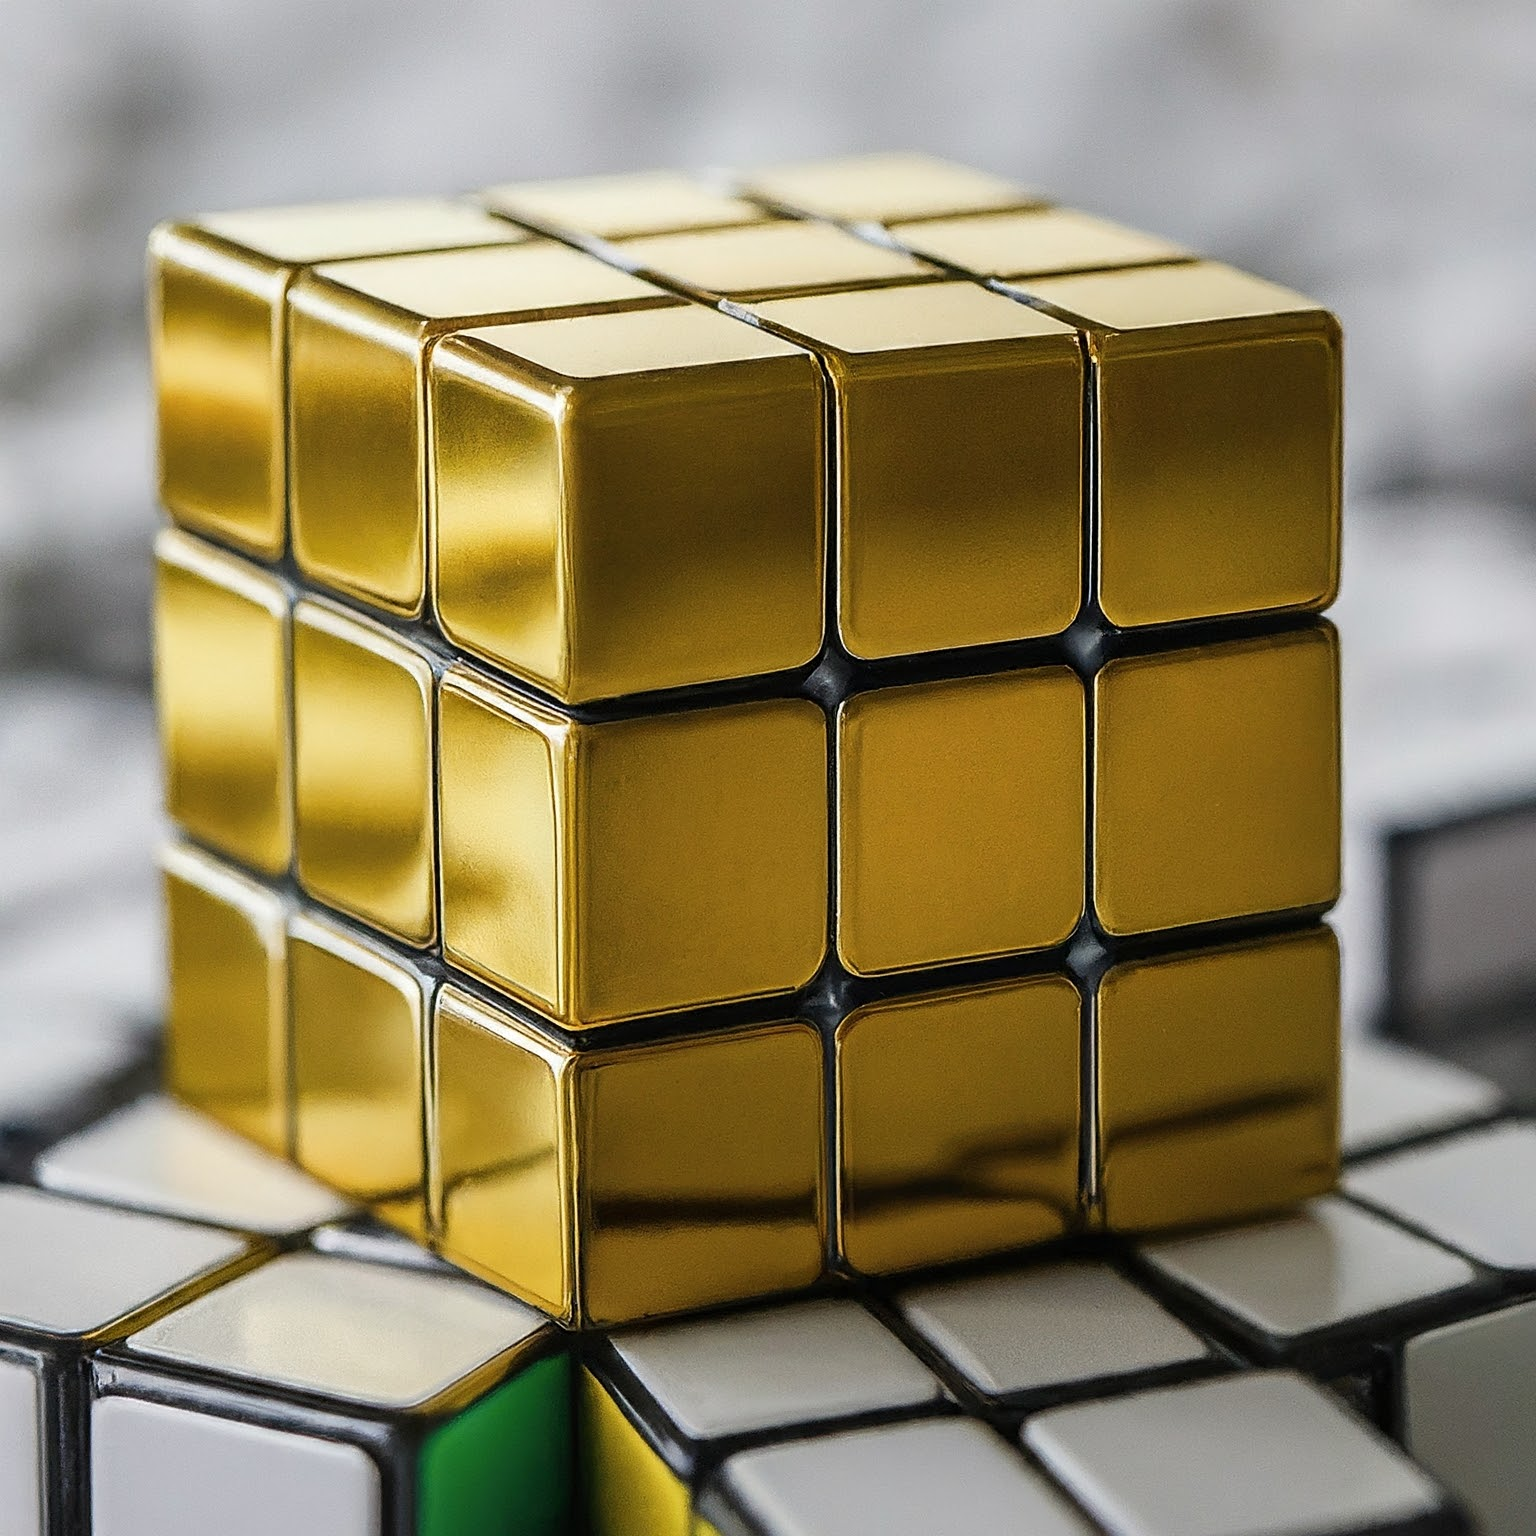  A classic Rubik's cube with all golden sides, symbolizing an underfitted machine learning model. 